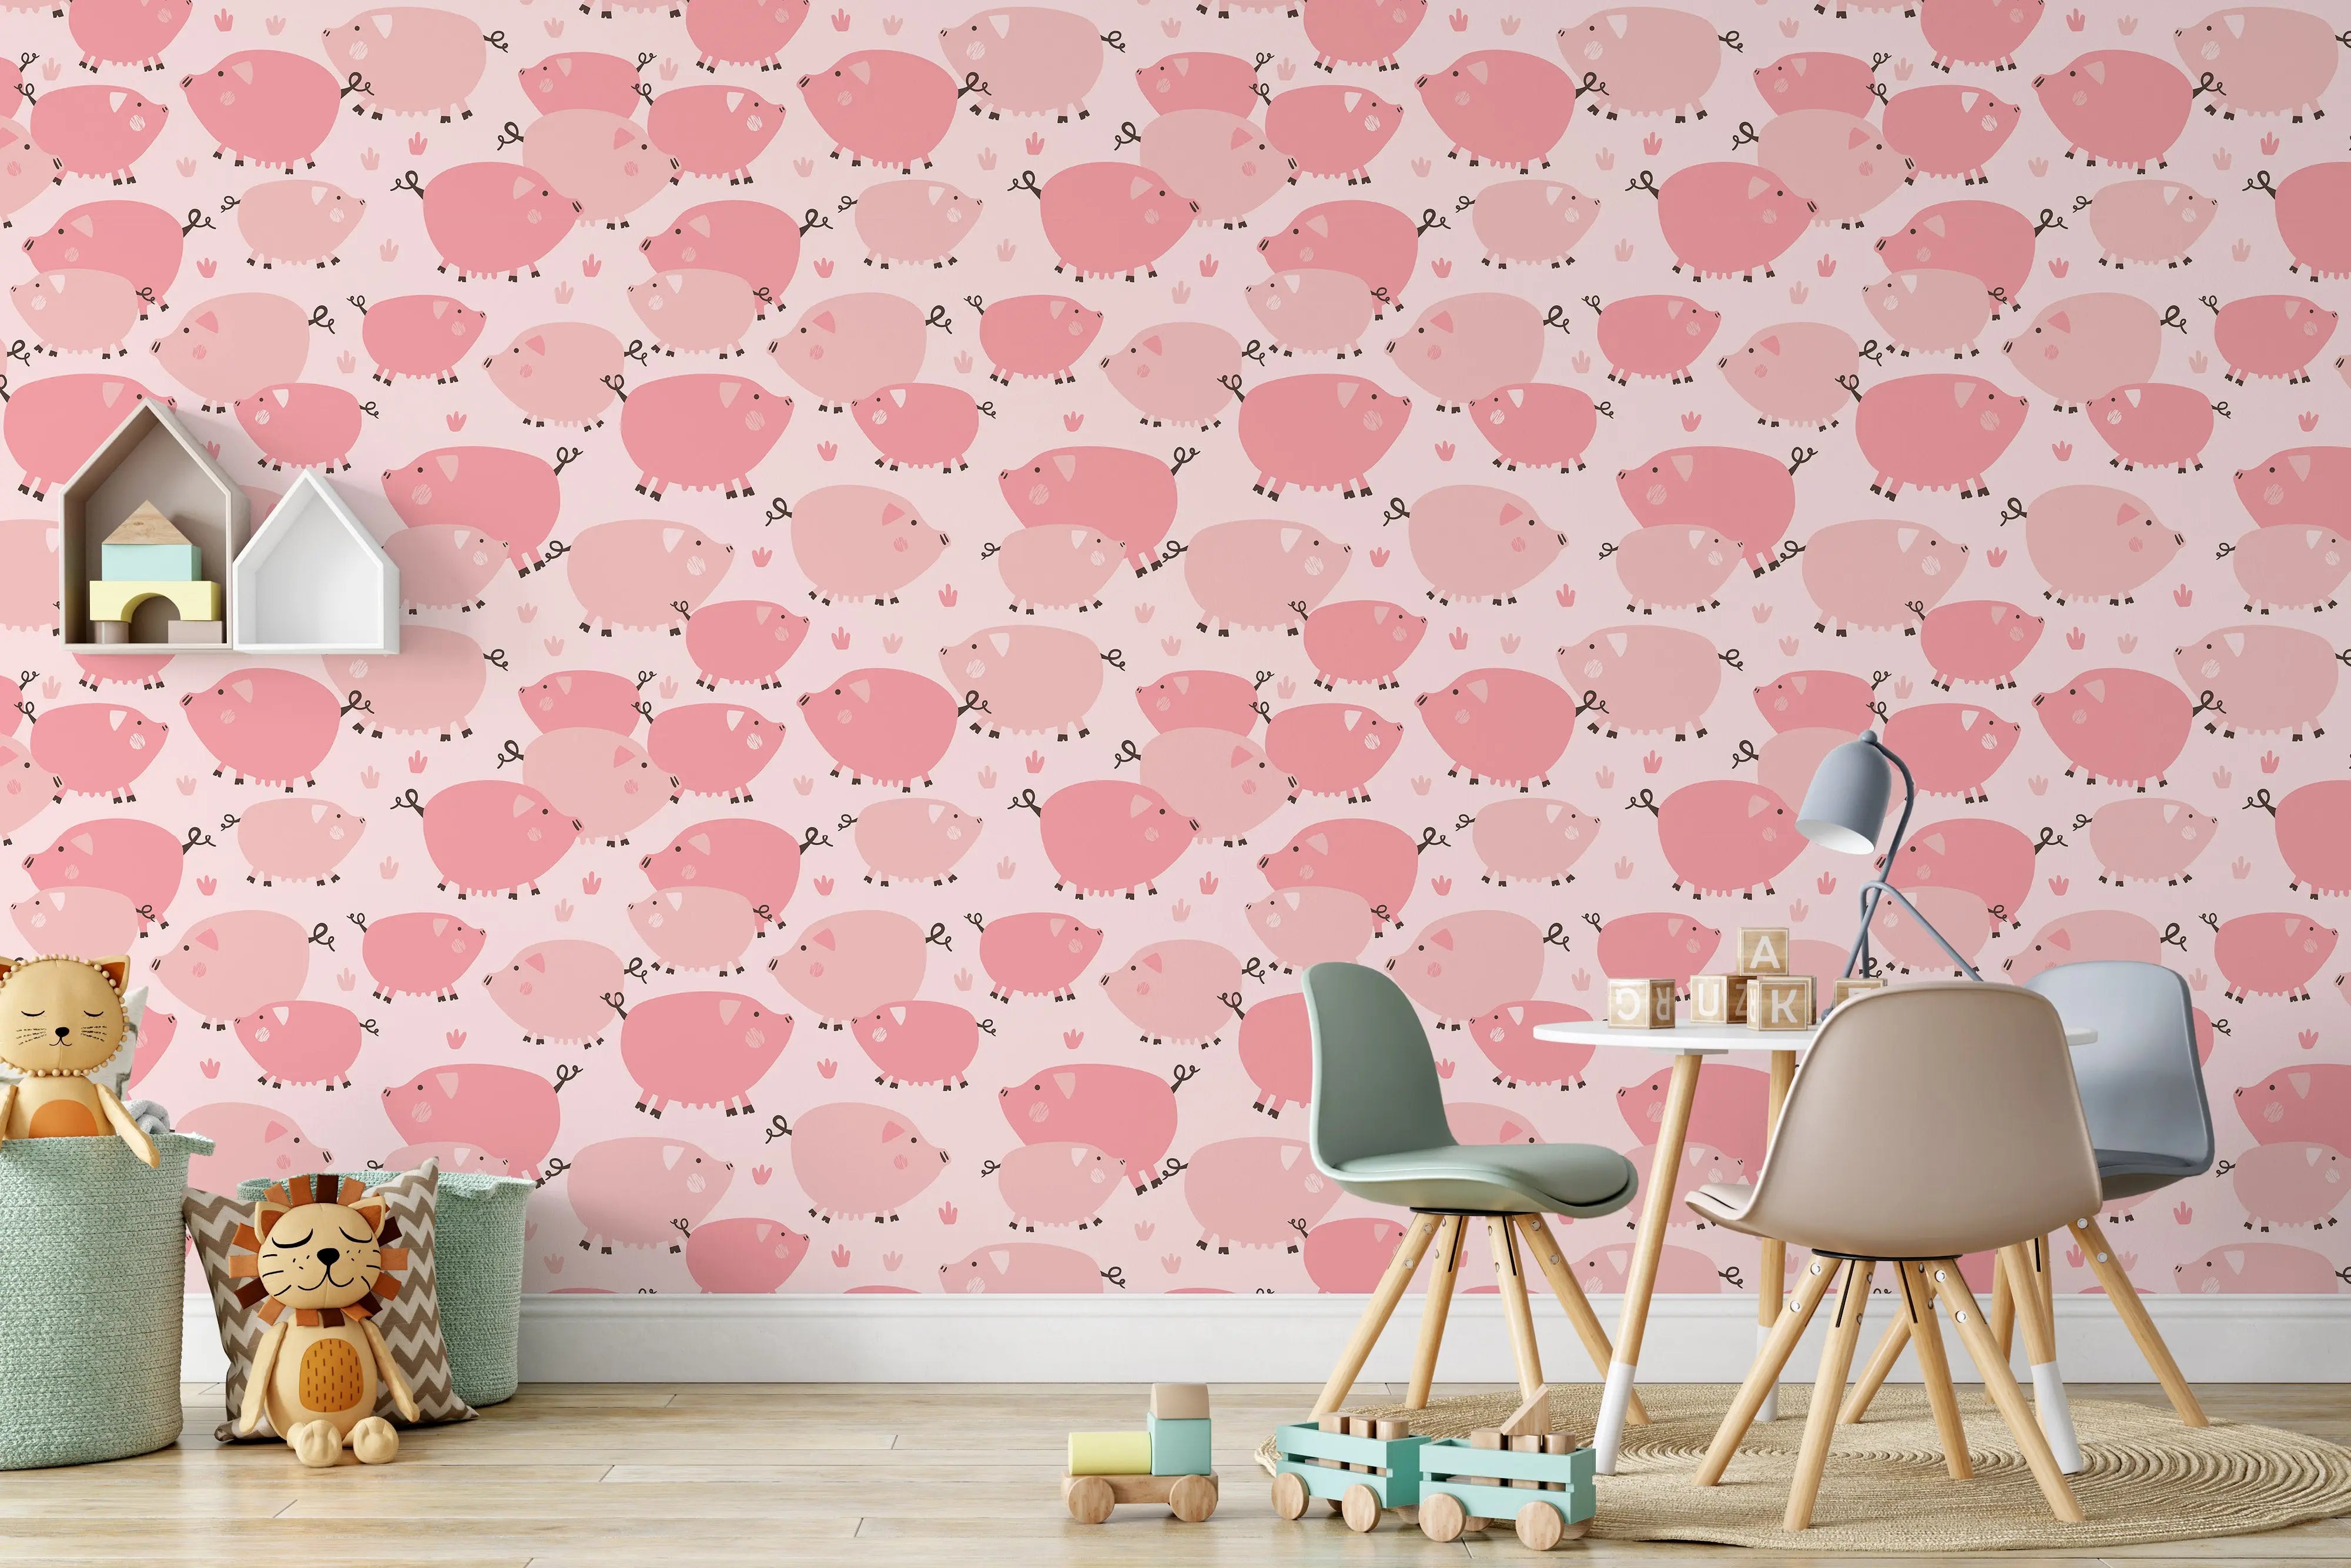 Pink Peel and Stick Removable Wallpaper